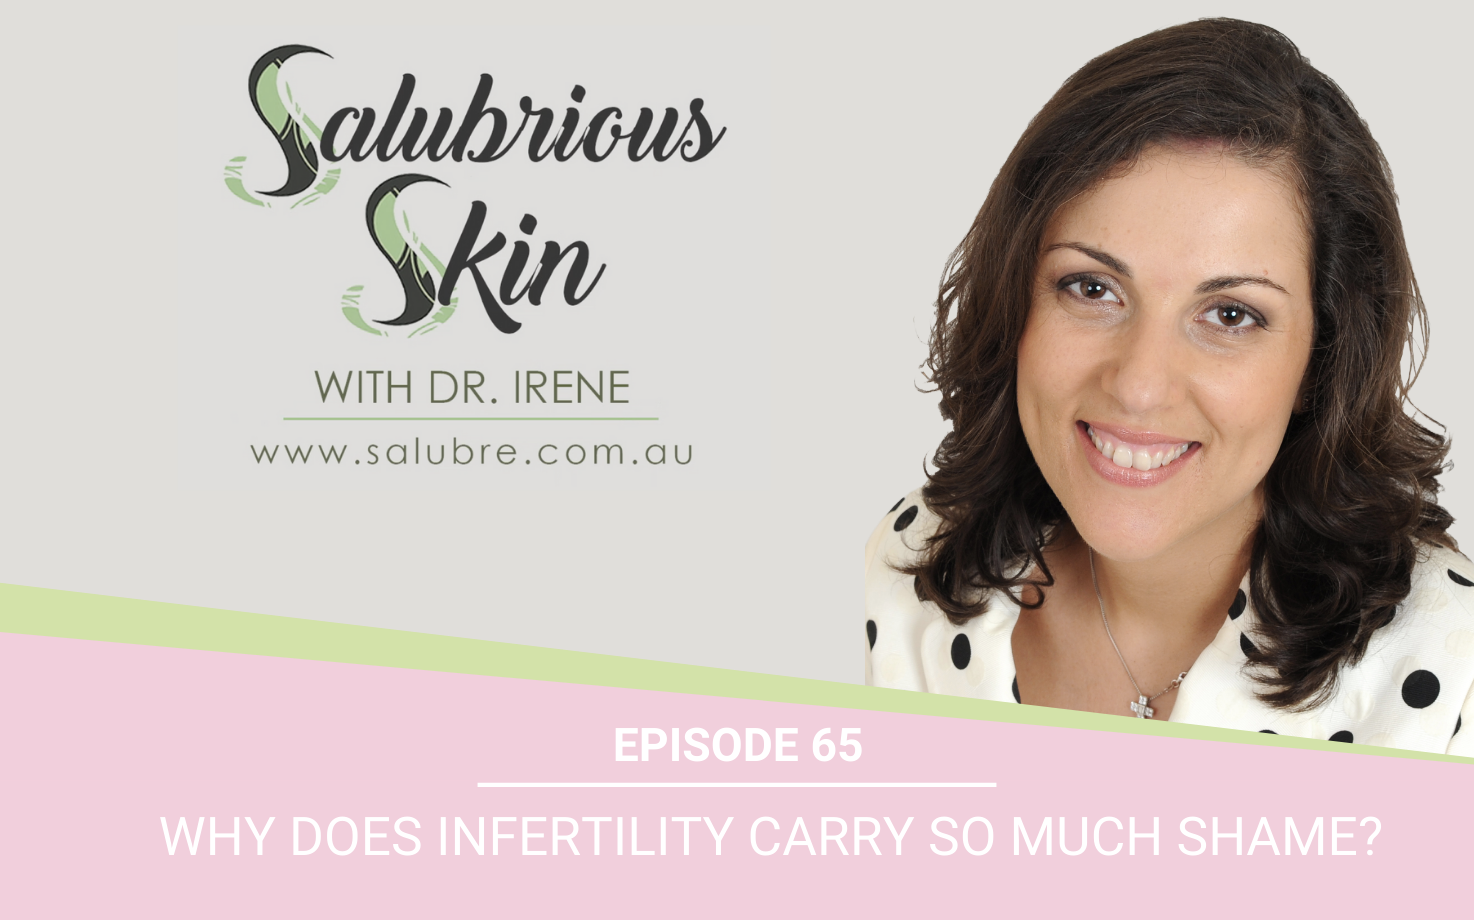 Podcast 65: Why does infertility carry so much shame?